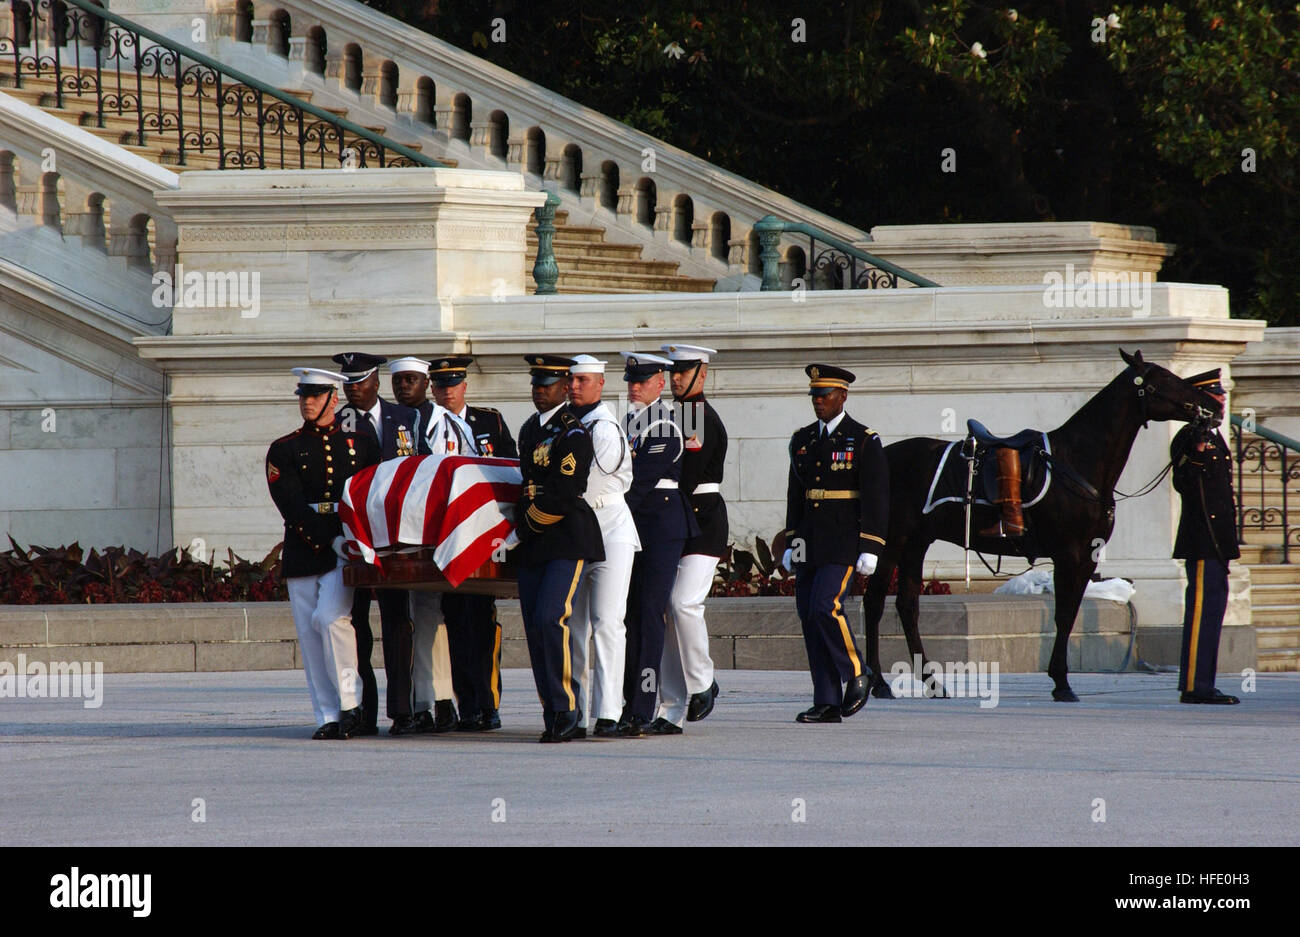 040609-A-5968S-051 Washington, D.C. (Jun. 9, 2004) - Ceremonial Honor Guard carry the flag-draped casket of former President Ronald Reagan up the steps of the U.S. Capitol. Reagan's body will lie in state at the Capitol Rotunda for public viewing until Friday morning in Washington, D.C.  A state funeral will be conducted late Friday morning at the Washington National Cathedral, where President Bush will give the eulogy. U.S. Army photo by Staff Sgt. George Sebastian (RELEASED) US Navy 040609-A-5968S-051 Ceremonial Honor Guard carry the flag-draped casket of former President Ronald Reagan up th Stock Photo